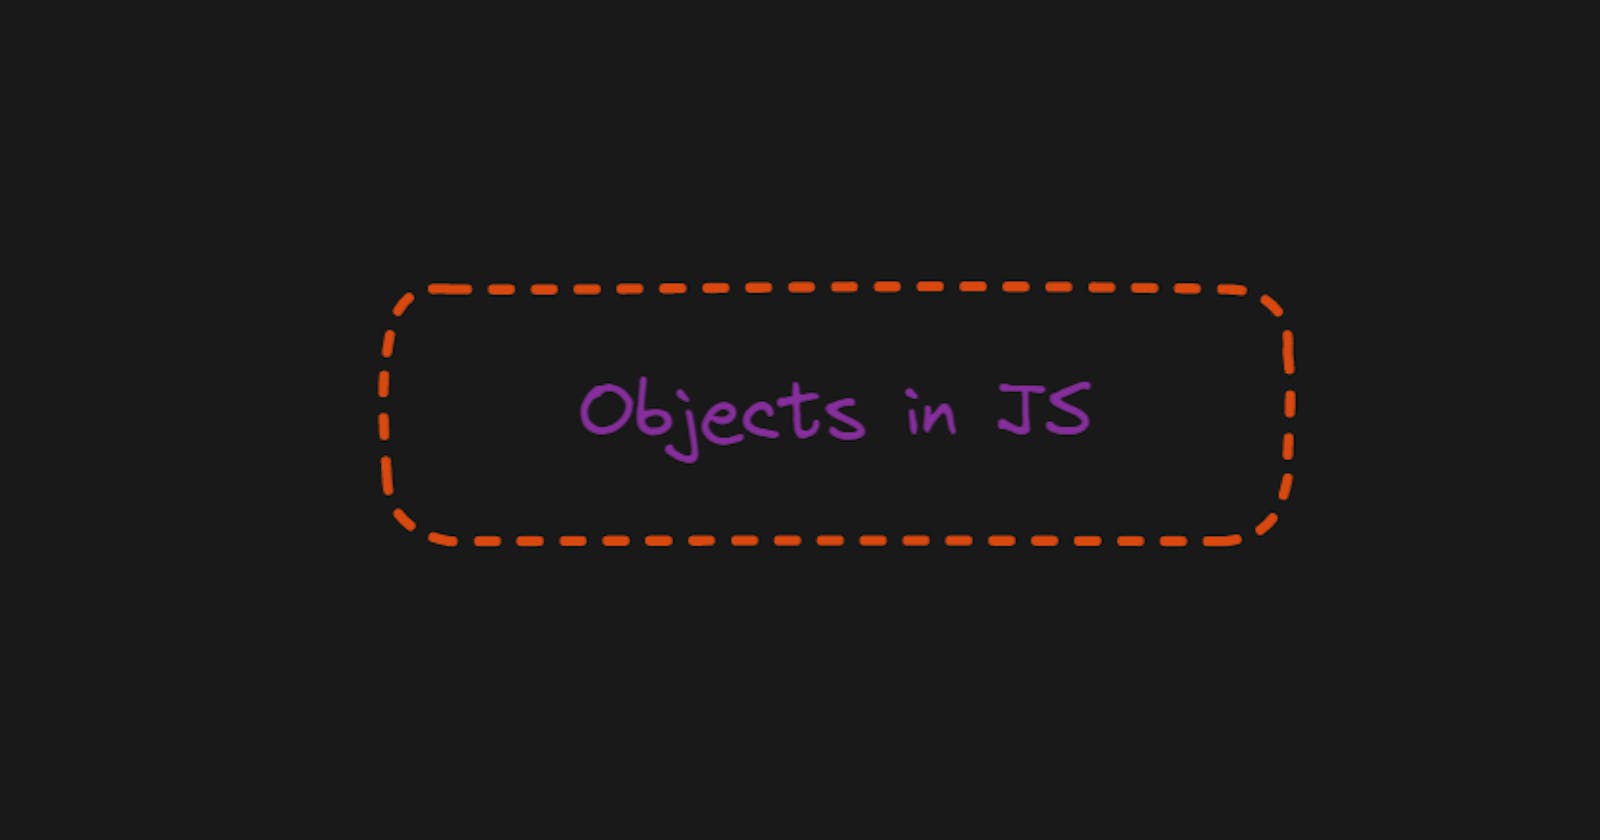 Objects in JavaScript